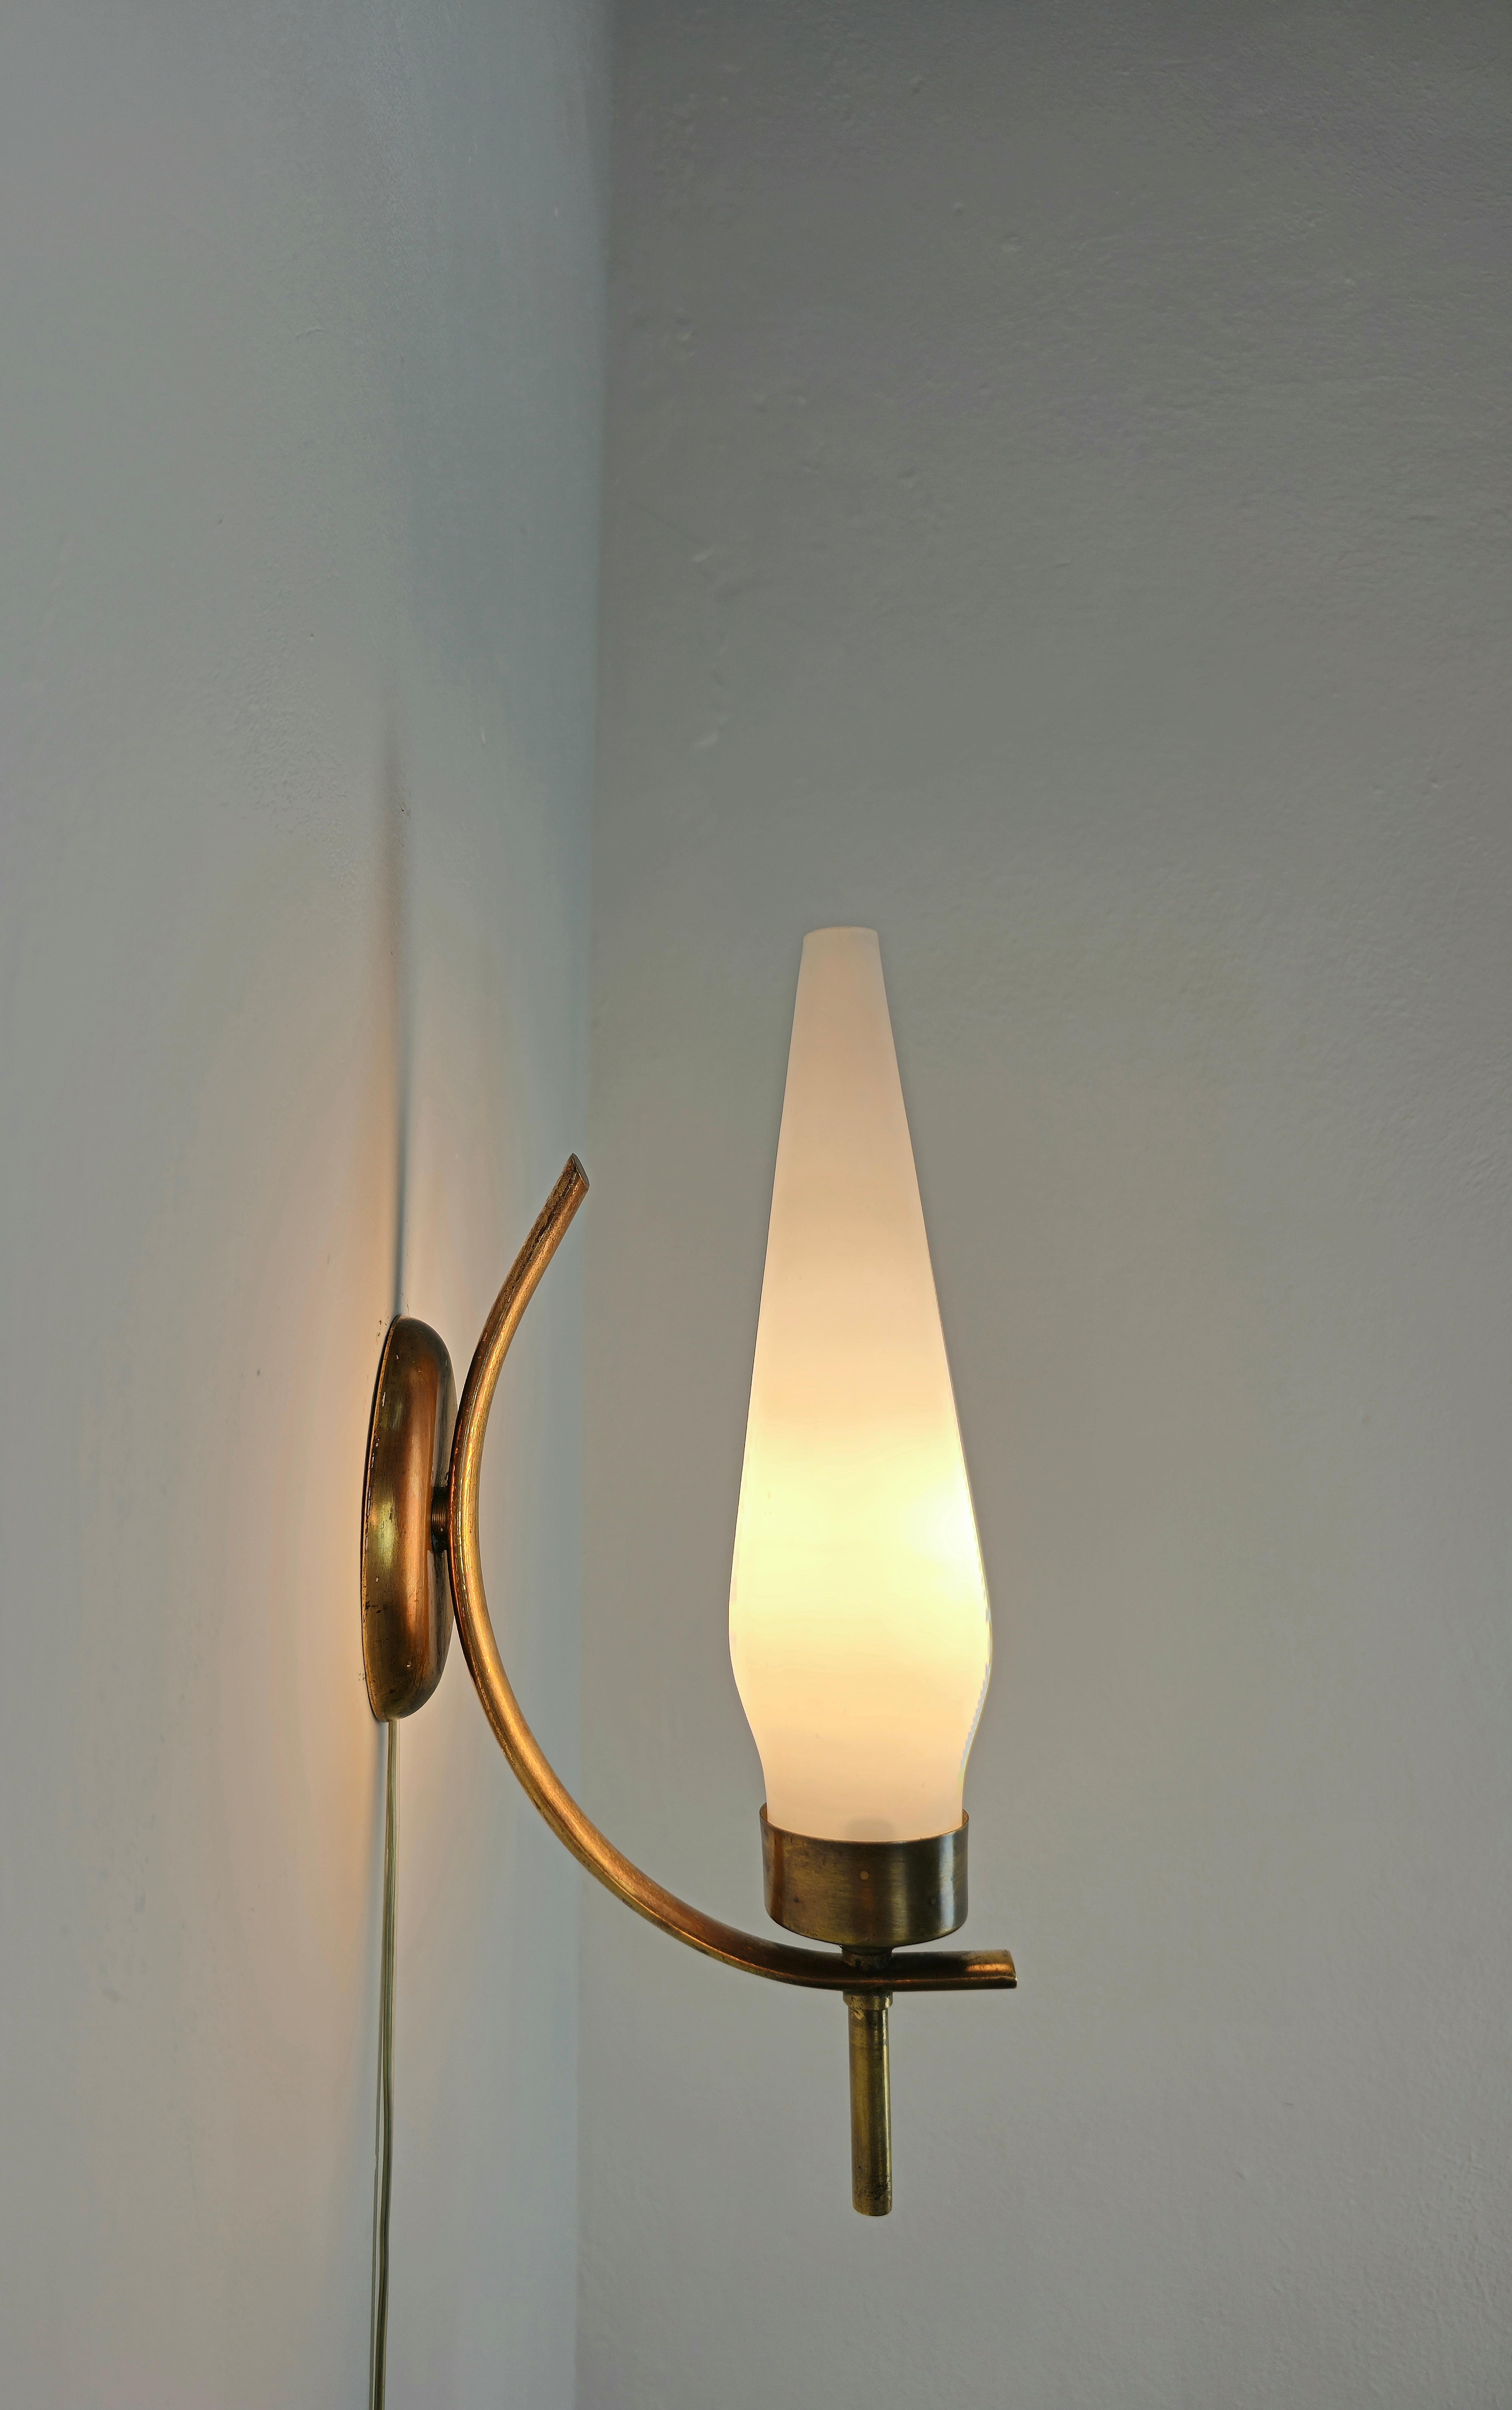 Pair of Wall Lights Sconces Brass Opaline Glass Midcentury Italian Design 1960s  In Good Condition For Sale In Palermo, IT